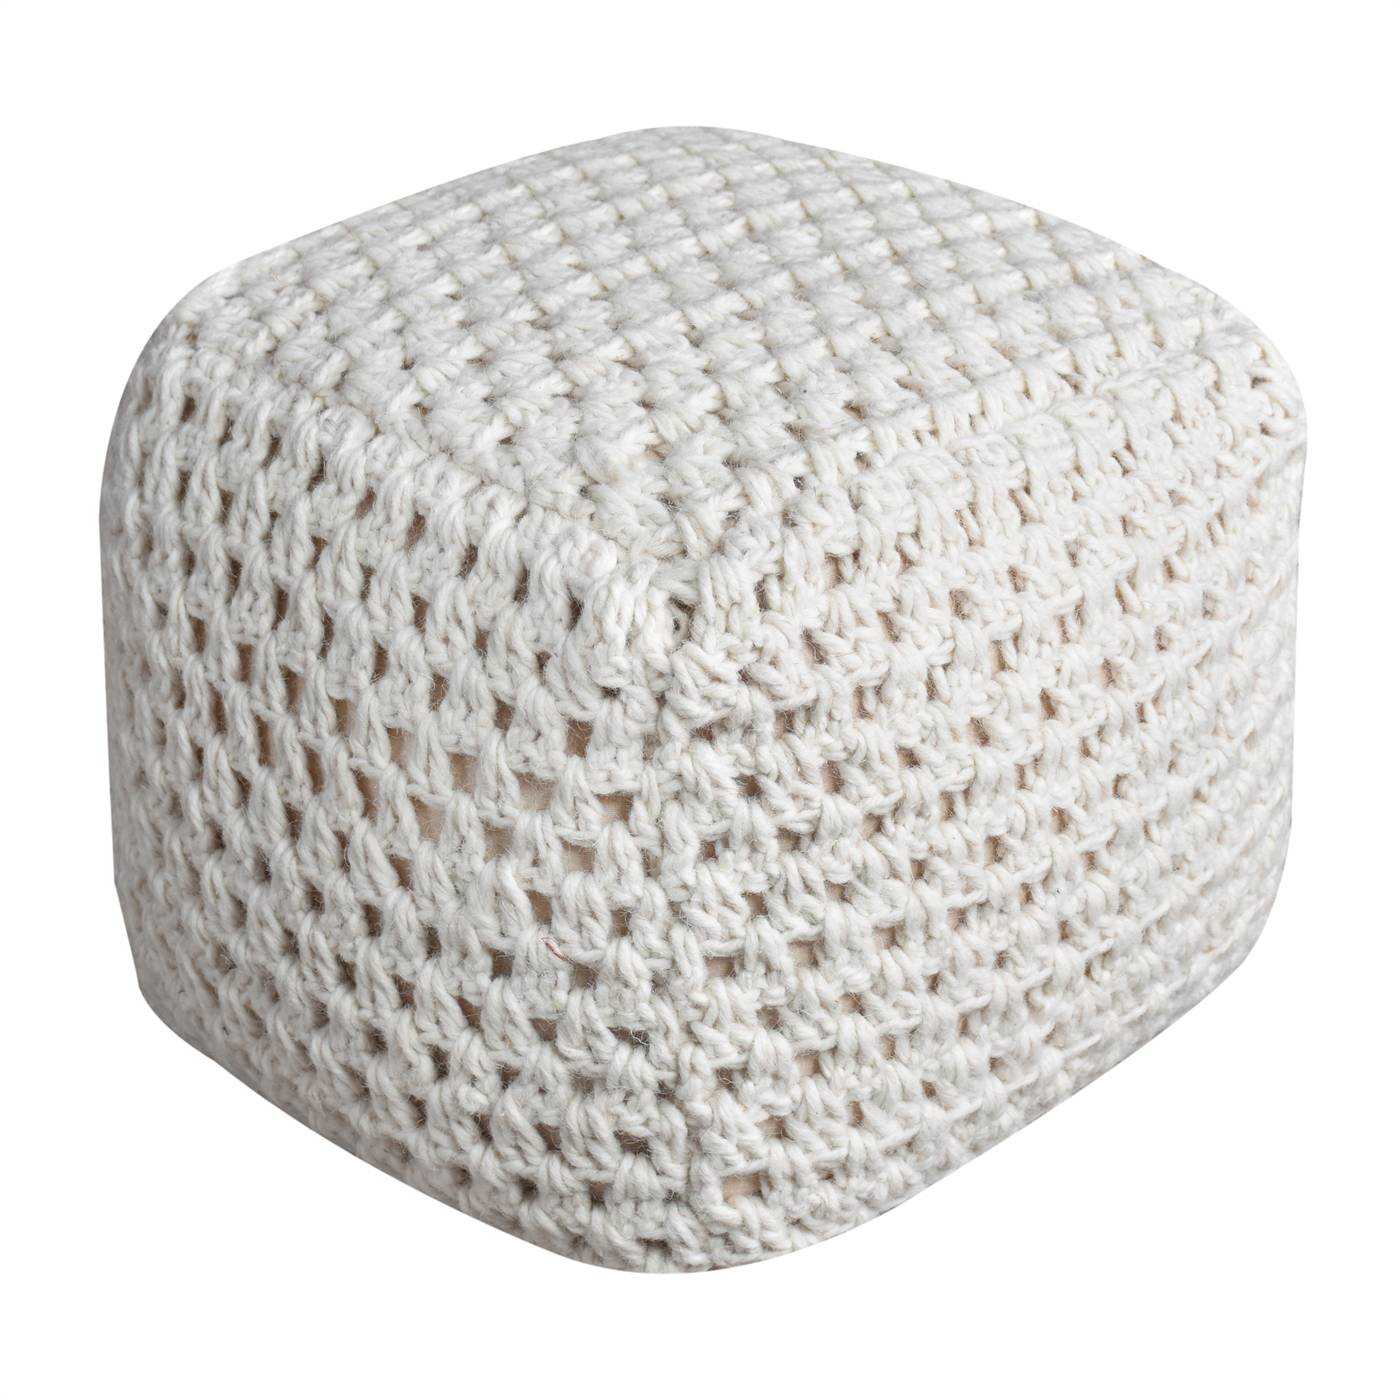 Talcott Pouf, 40x40x40 cm, Natural White, Wool, Hand Knitted, Hm Knitted, Flat Weave